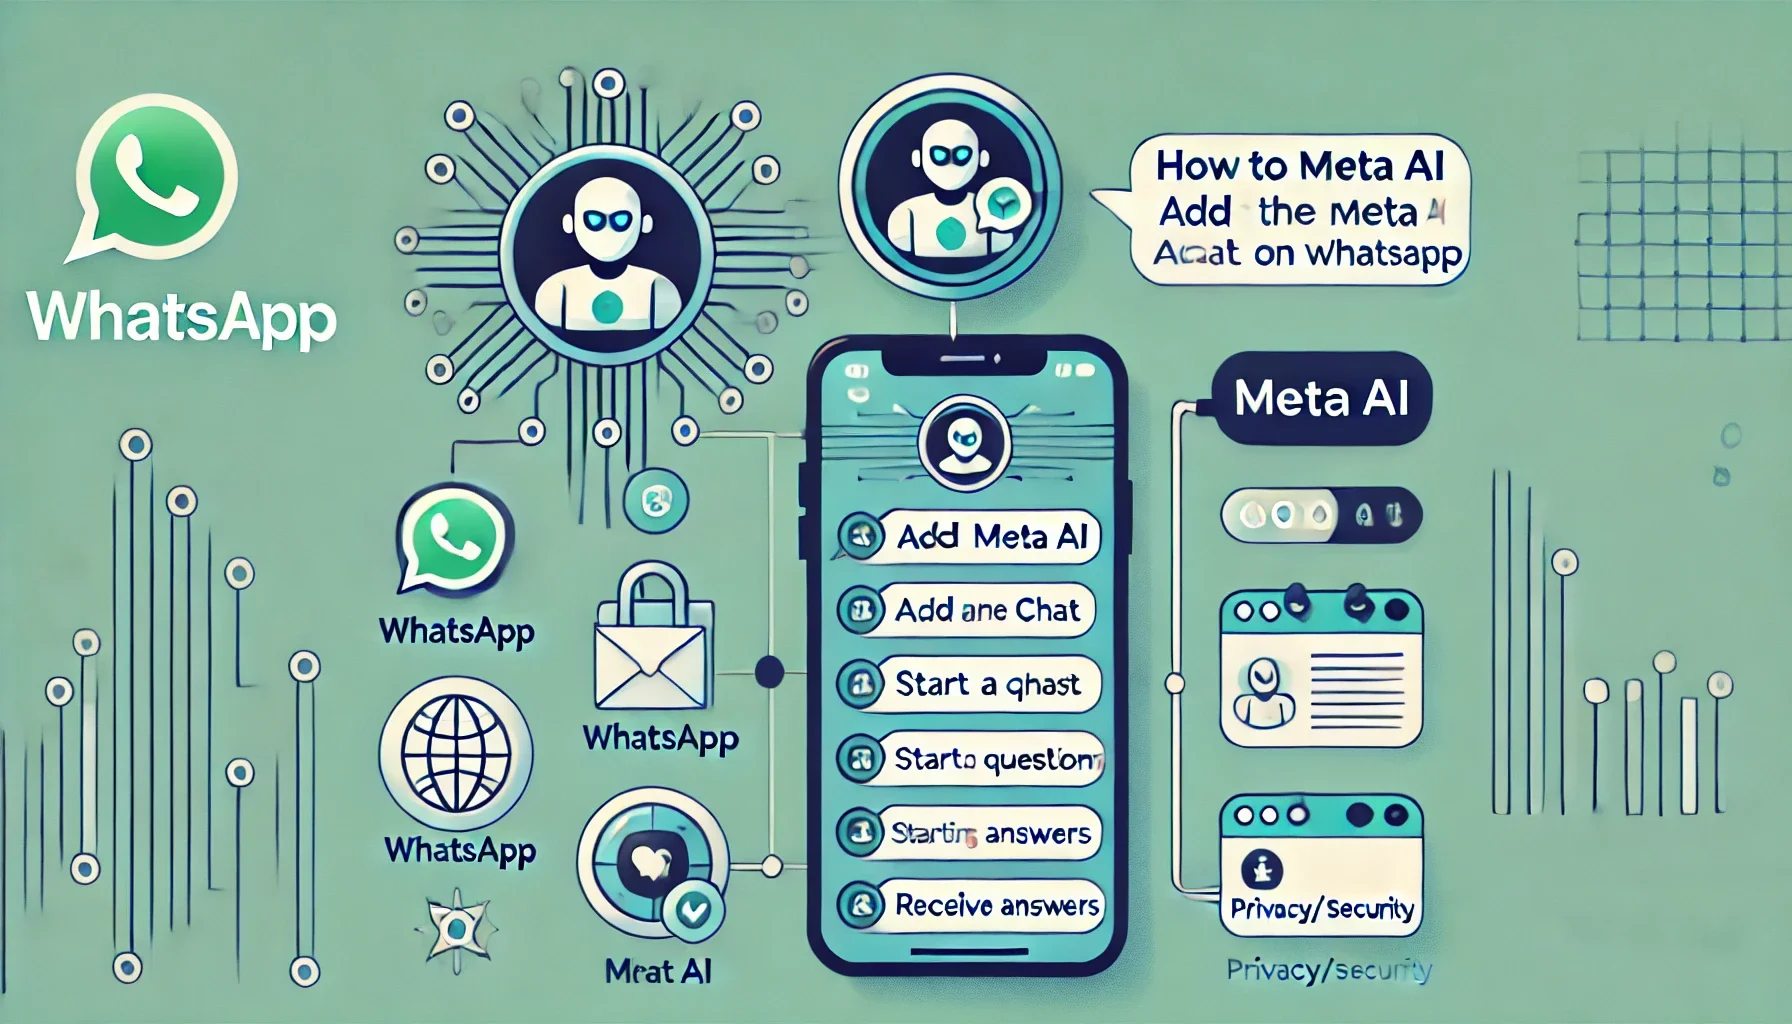 How to Use Meta AI on WhatsApp? A Simple Step-by-Step Guide